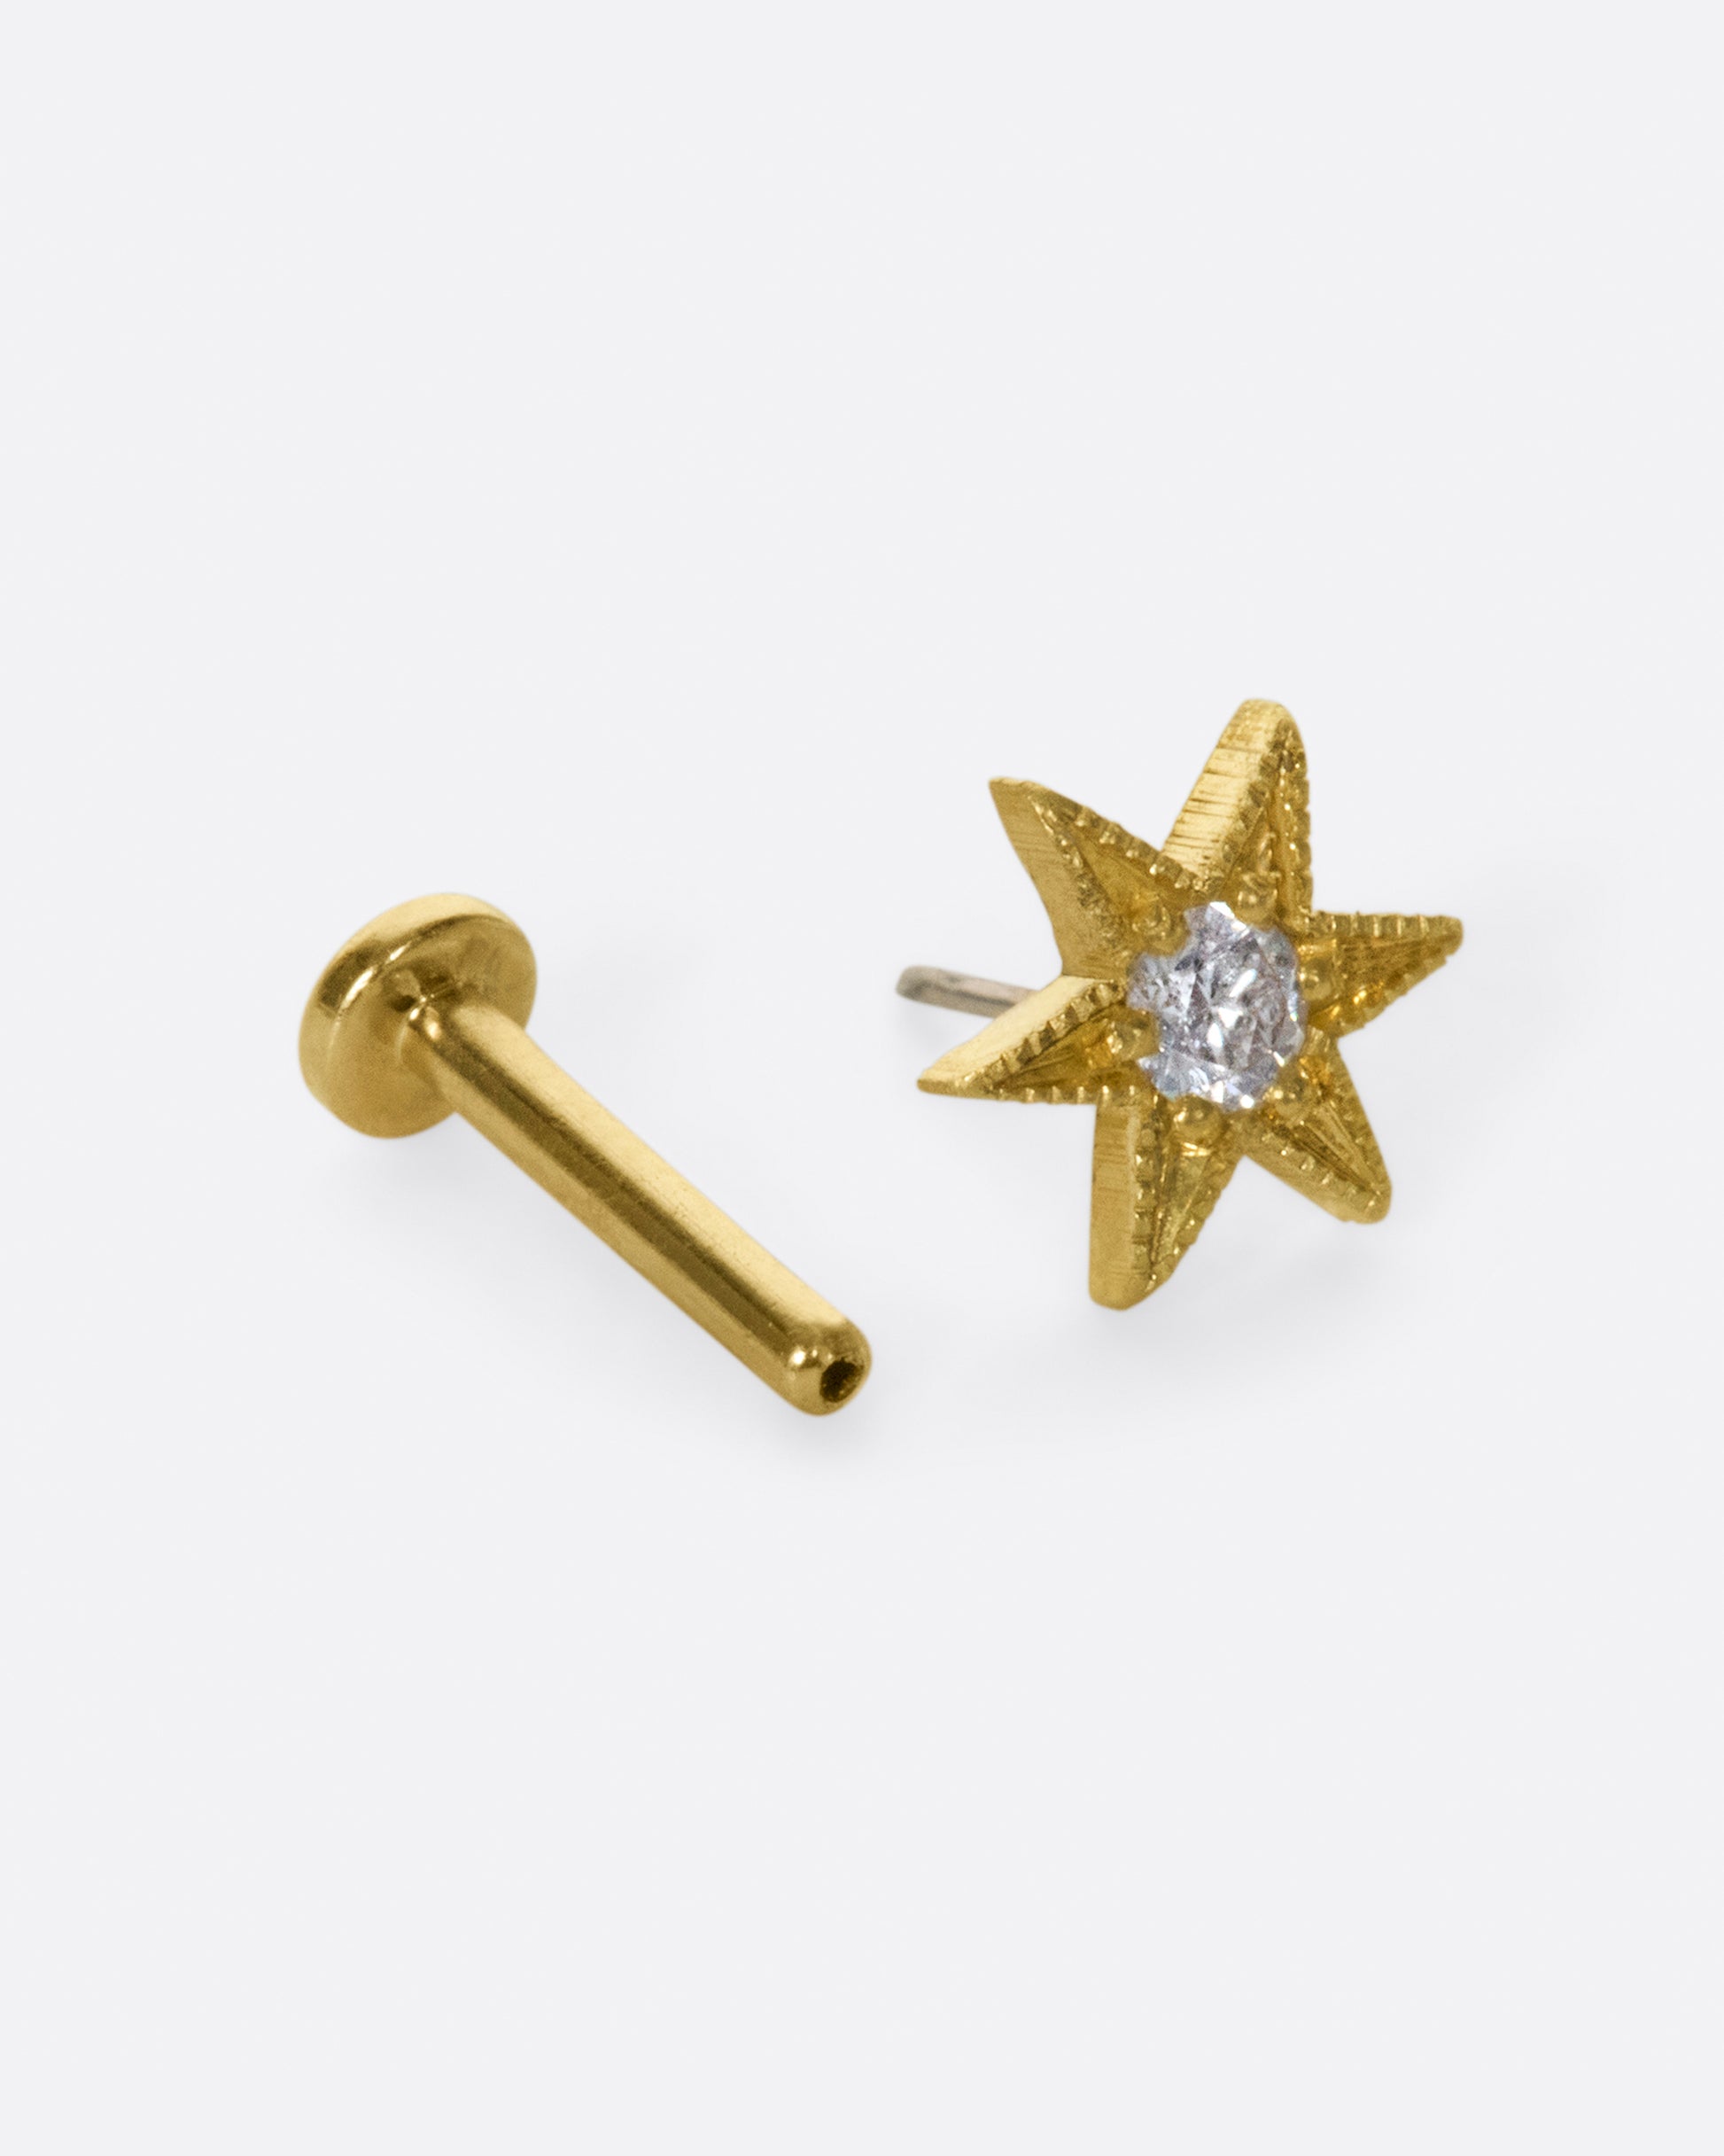 A bright, shining star that will sparkle wherever it lives on your ear.